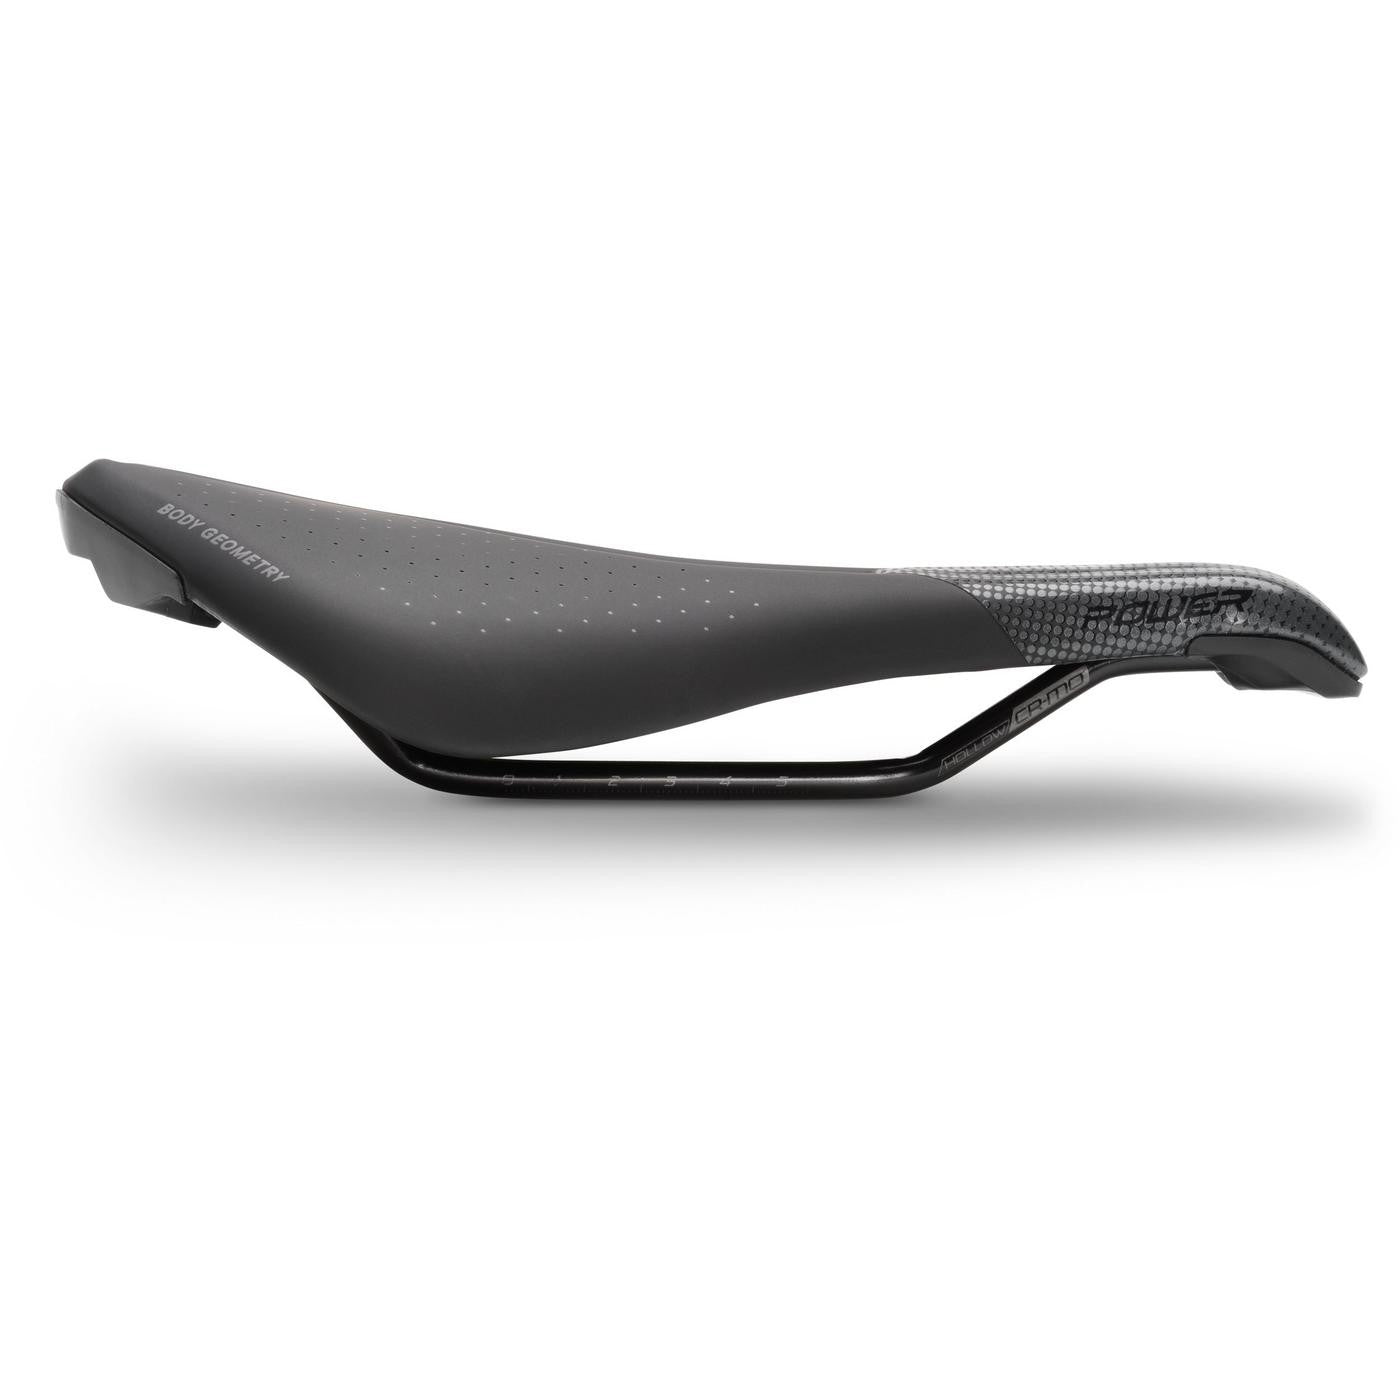 Specialized Power Comp with MIMIC Women's Bicycle Saddle - Saddles - Bicycle Warehouse